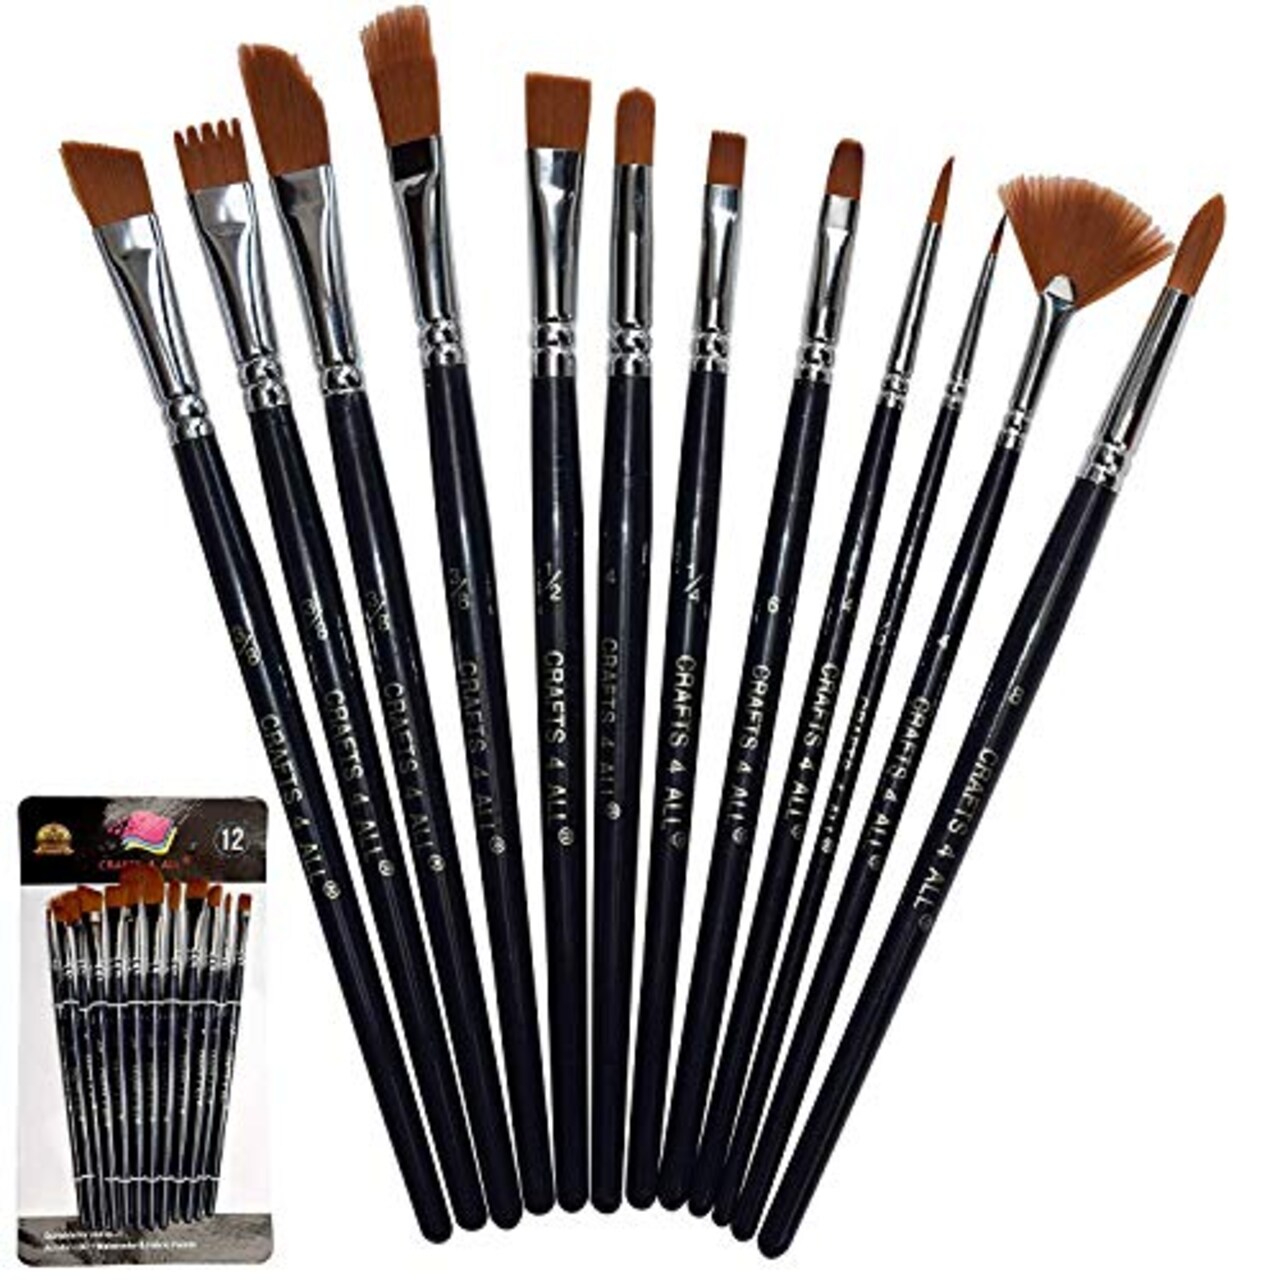 Crafts 4 All Acrylic Paint Brushes - Pack of 12 Professional, Wide